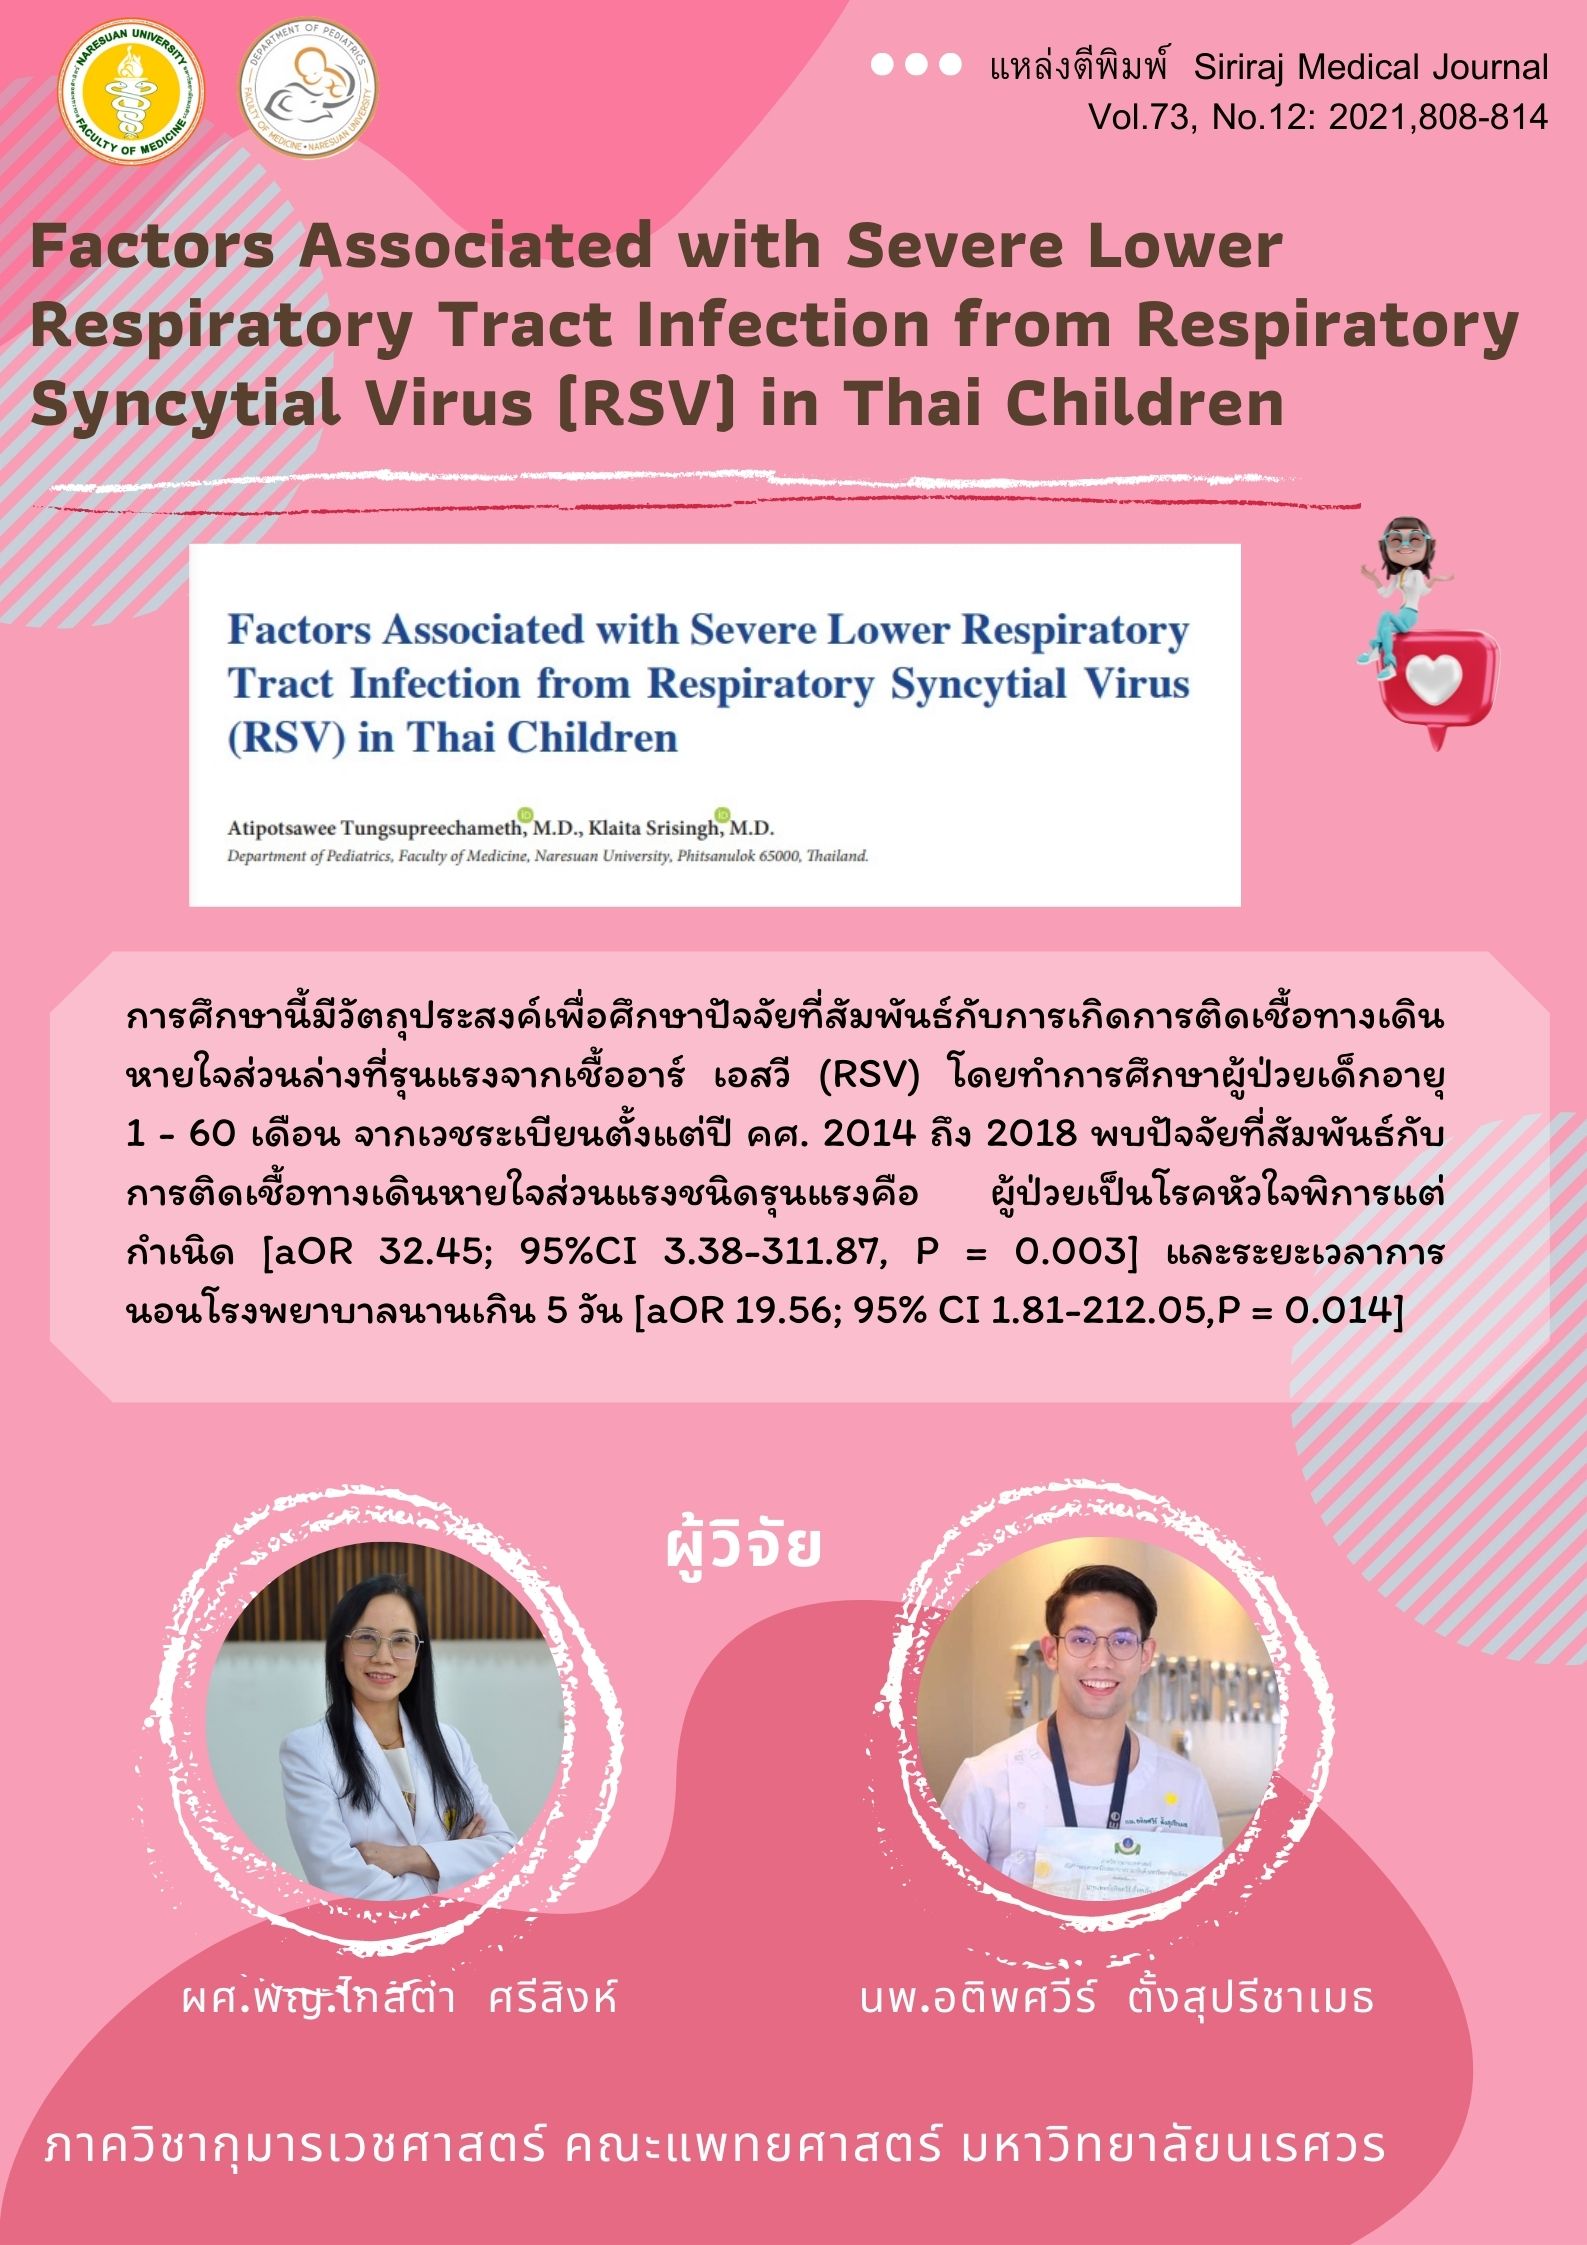 Factors Associated with Severe Lower Respiratory Tract Infection from Respiratory Syncytial Virus (RSV) in Thai Children